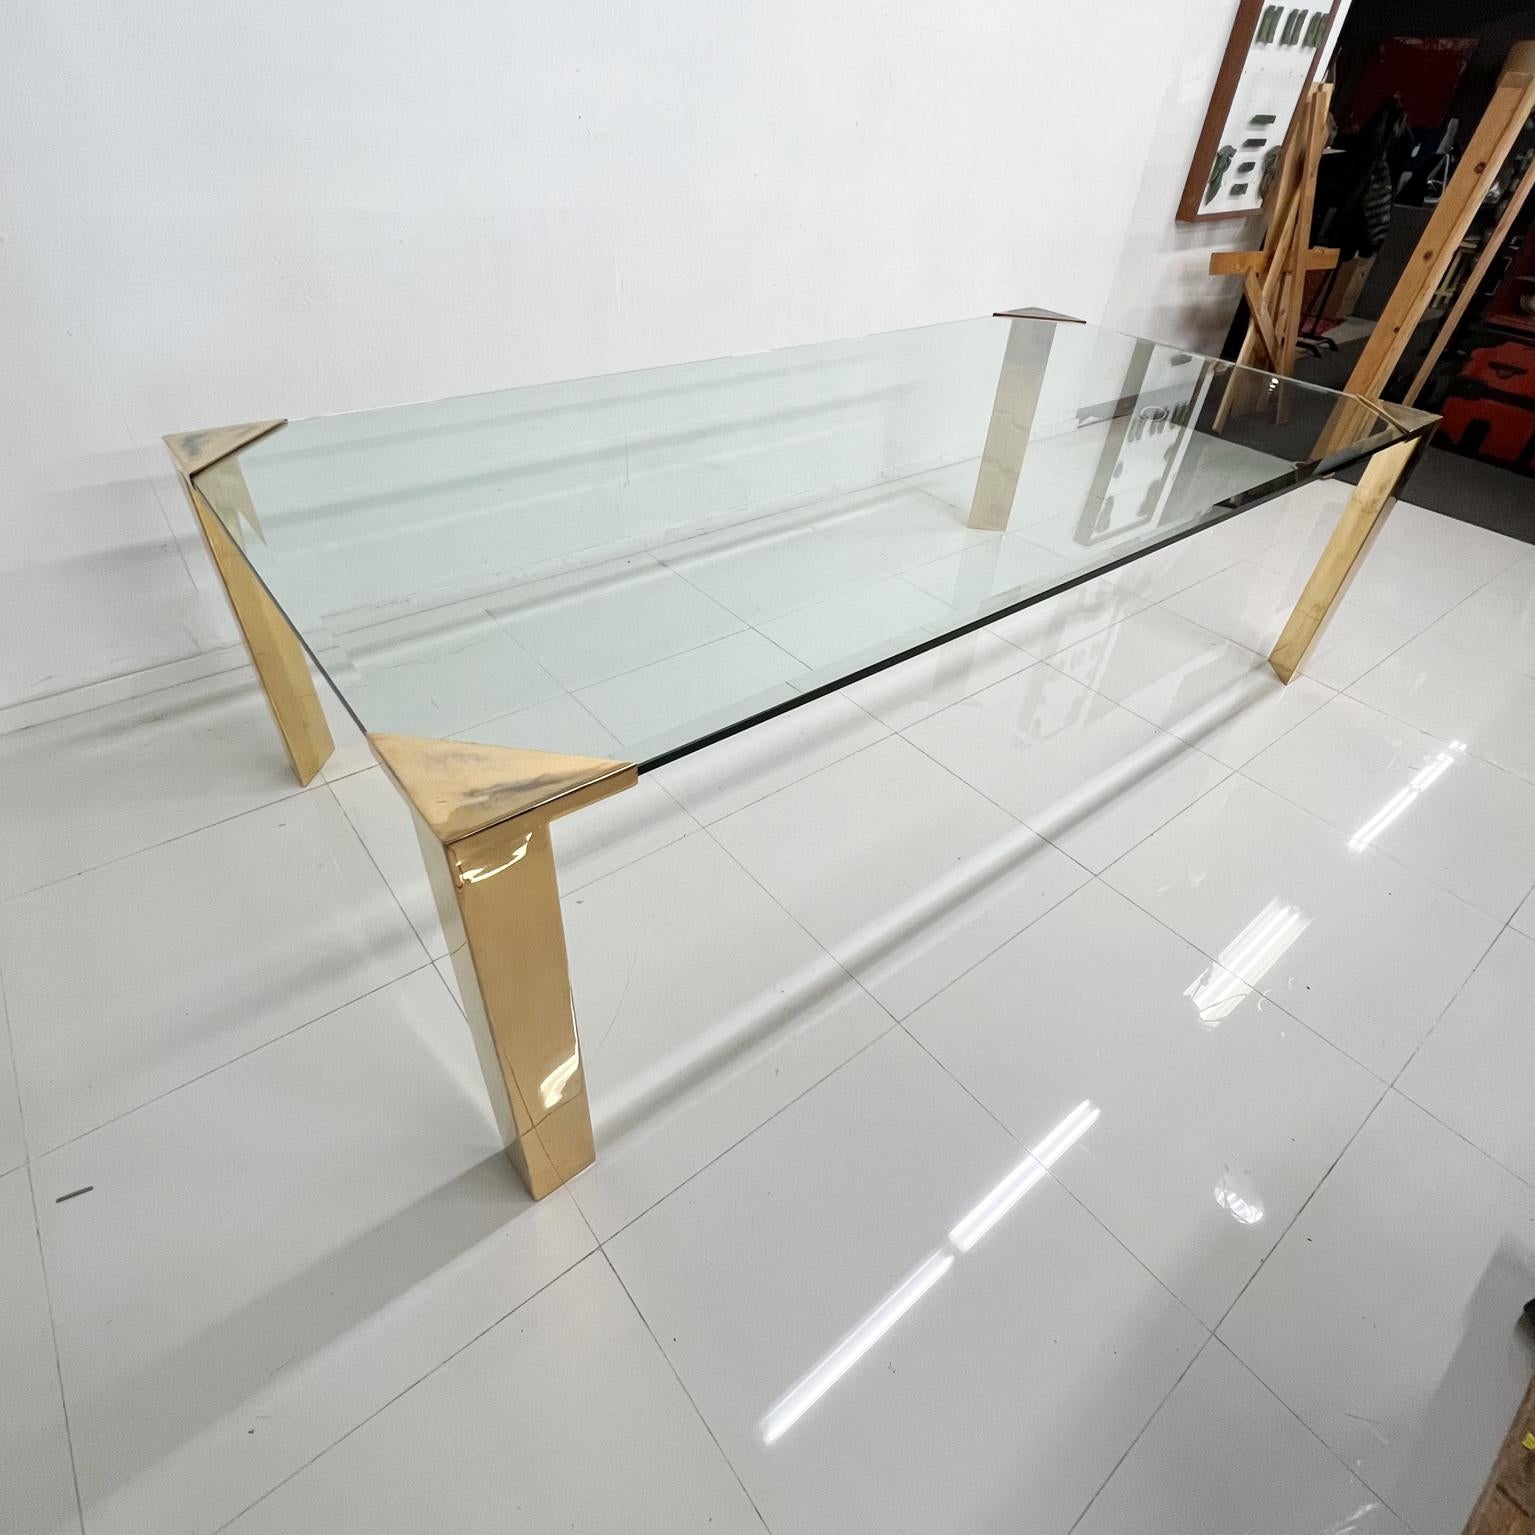 
1970s Modern Elegance Long Dining Table attribution Pace Collection.
In the style of Romeo Rega and Mastercraft. 
Stunning Regency 
Unmarked, no label.
Brass plated legs. 
New .75 thick glass with beveled edges 
Unrestored original patina, vintage